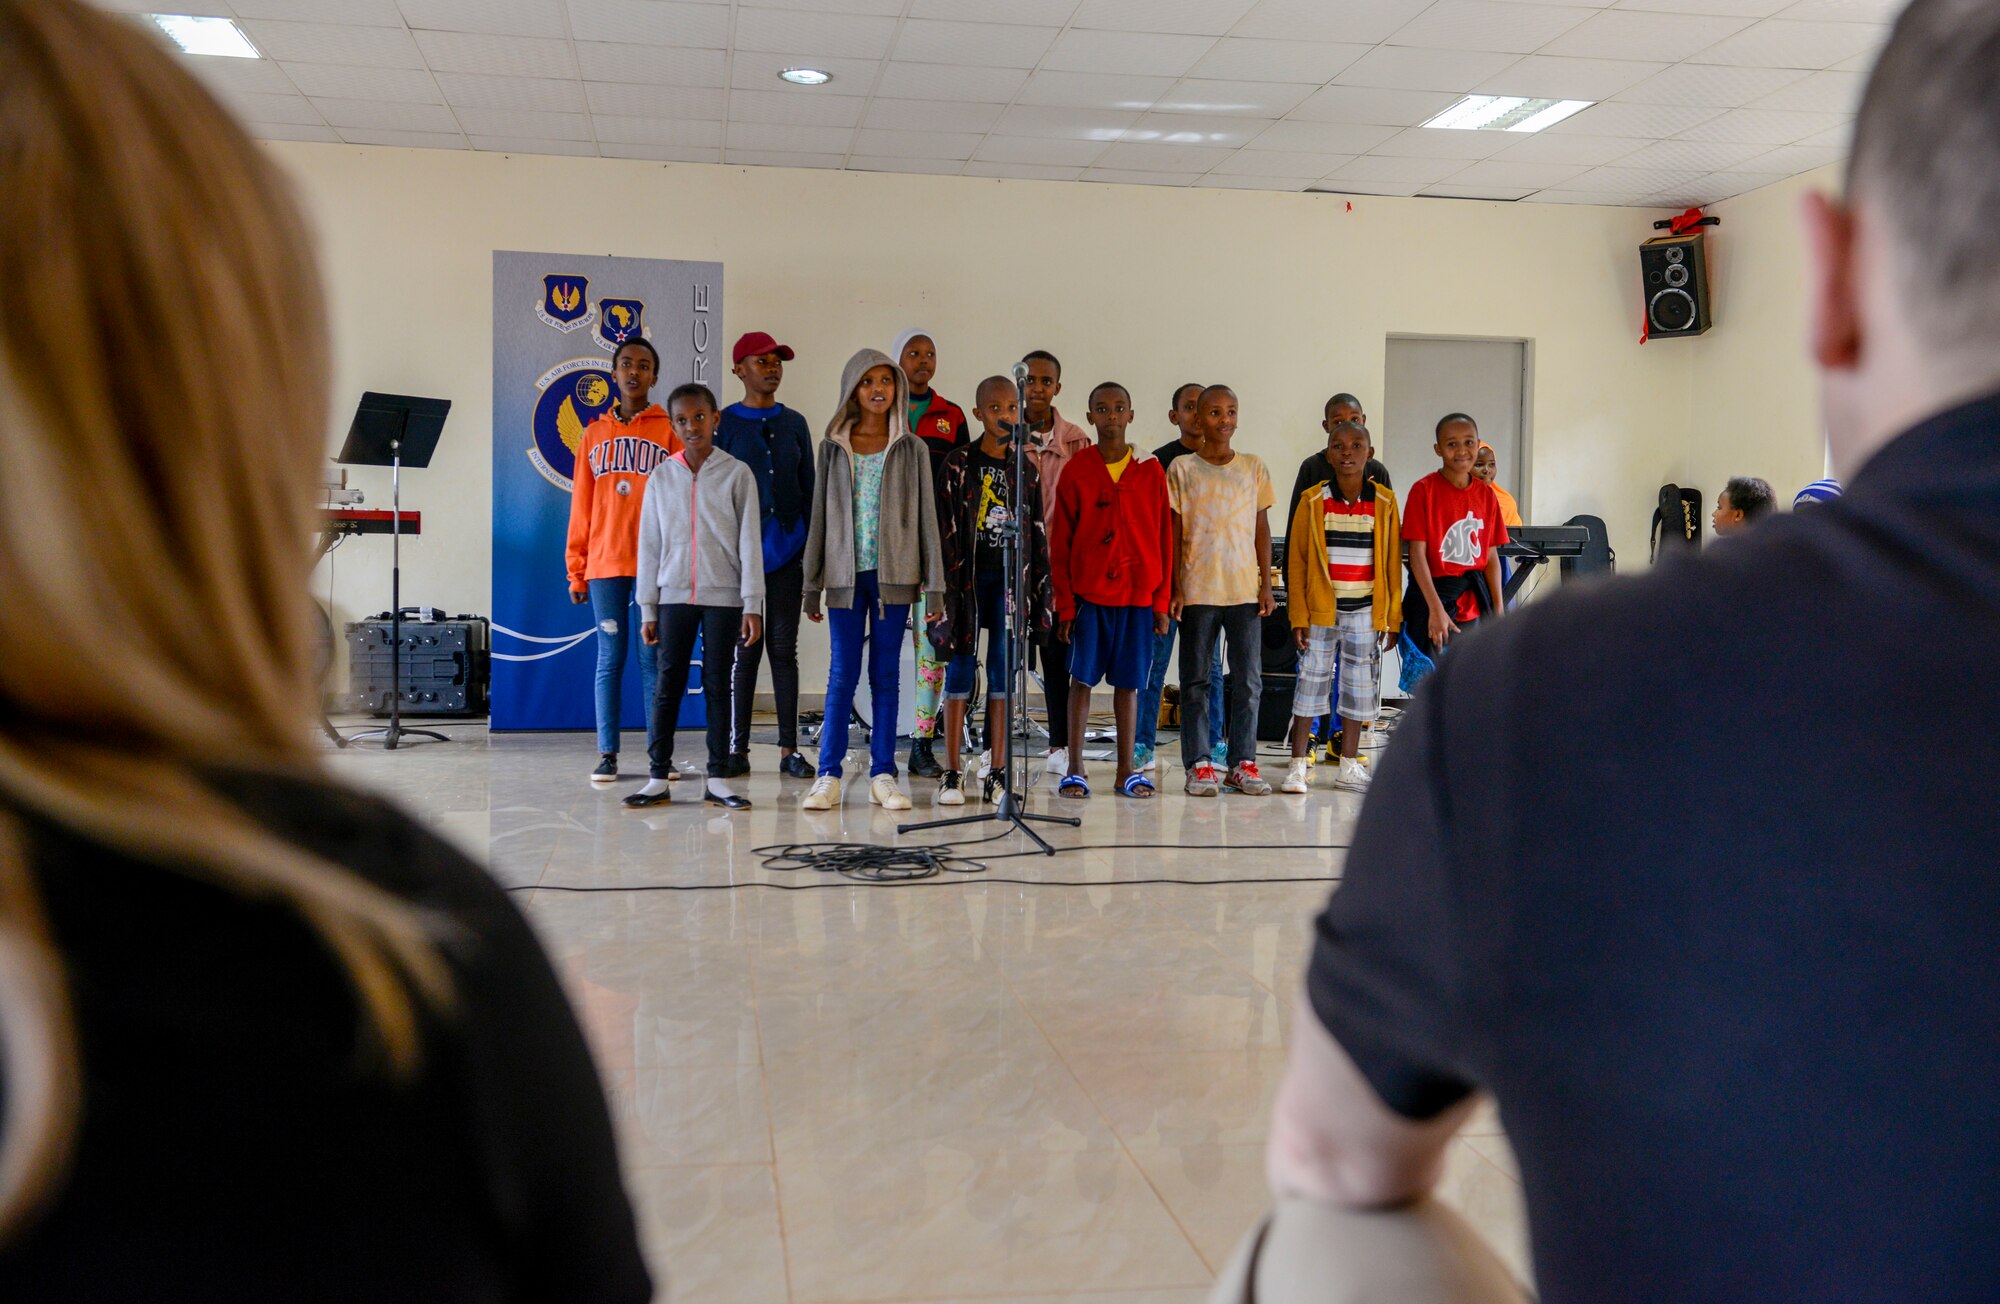 U.S. Airmen assigned to the U.S. Air Forces in Europe Band listen to a choir performance at the Gisimba Memorial Centre in Kigali, Rwanda, March 6, 2019. As musical ambassadors, members of the band can reach audiences that traditional military members can't. They travel the world to build cultural bridges, and honor and preserve cultural heritage. (U.S. Air Force photo by Tech. Sgt. Timothy Moore)